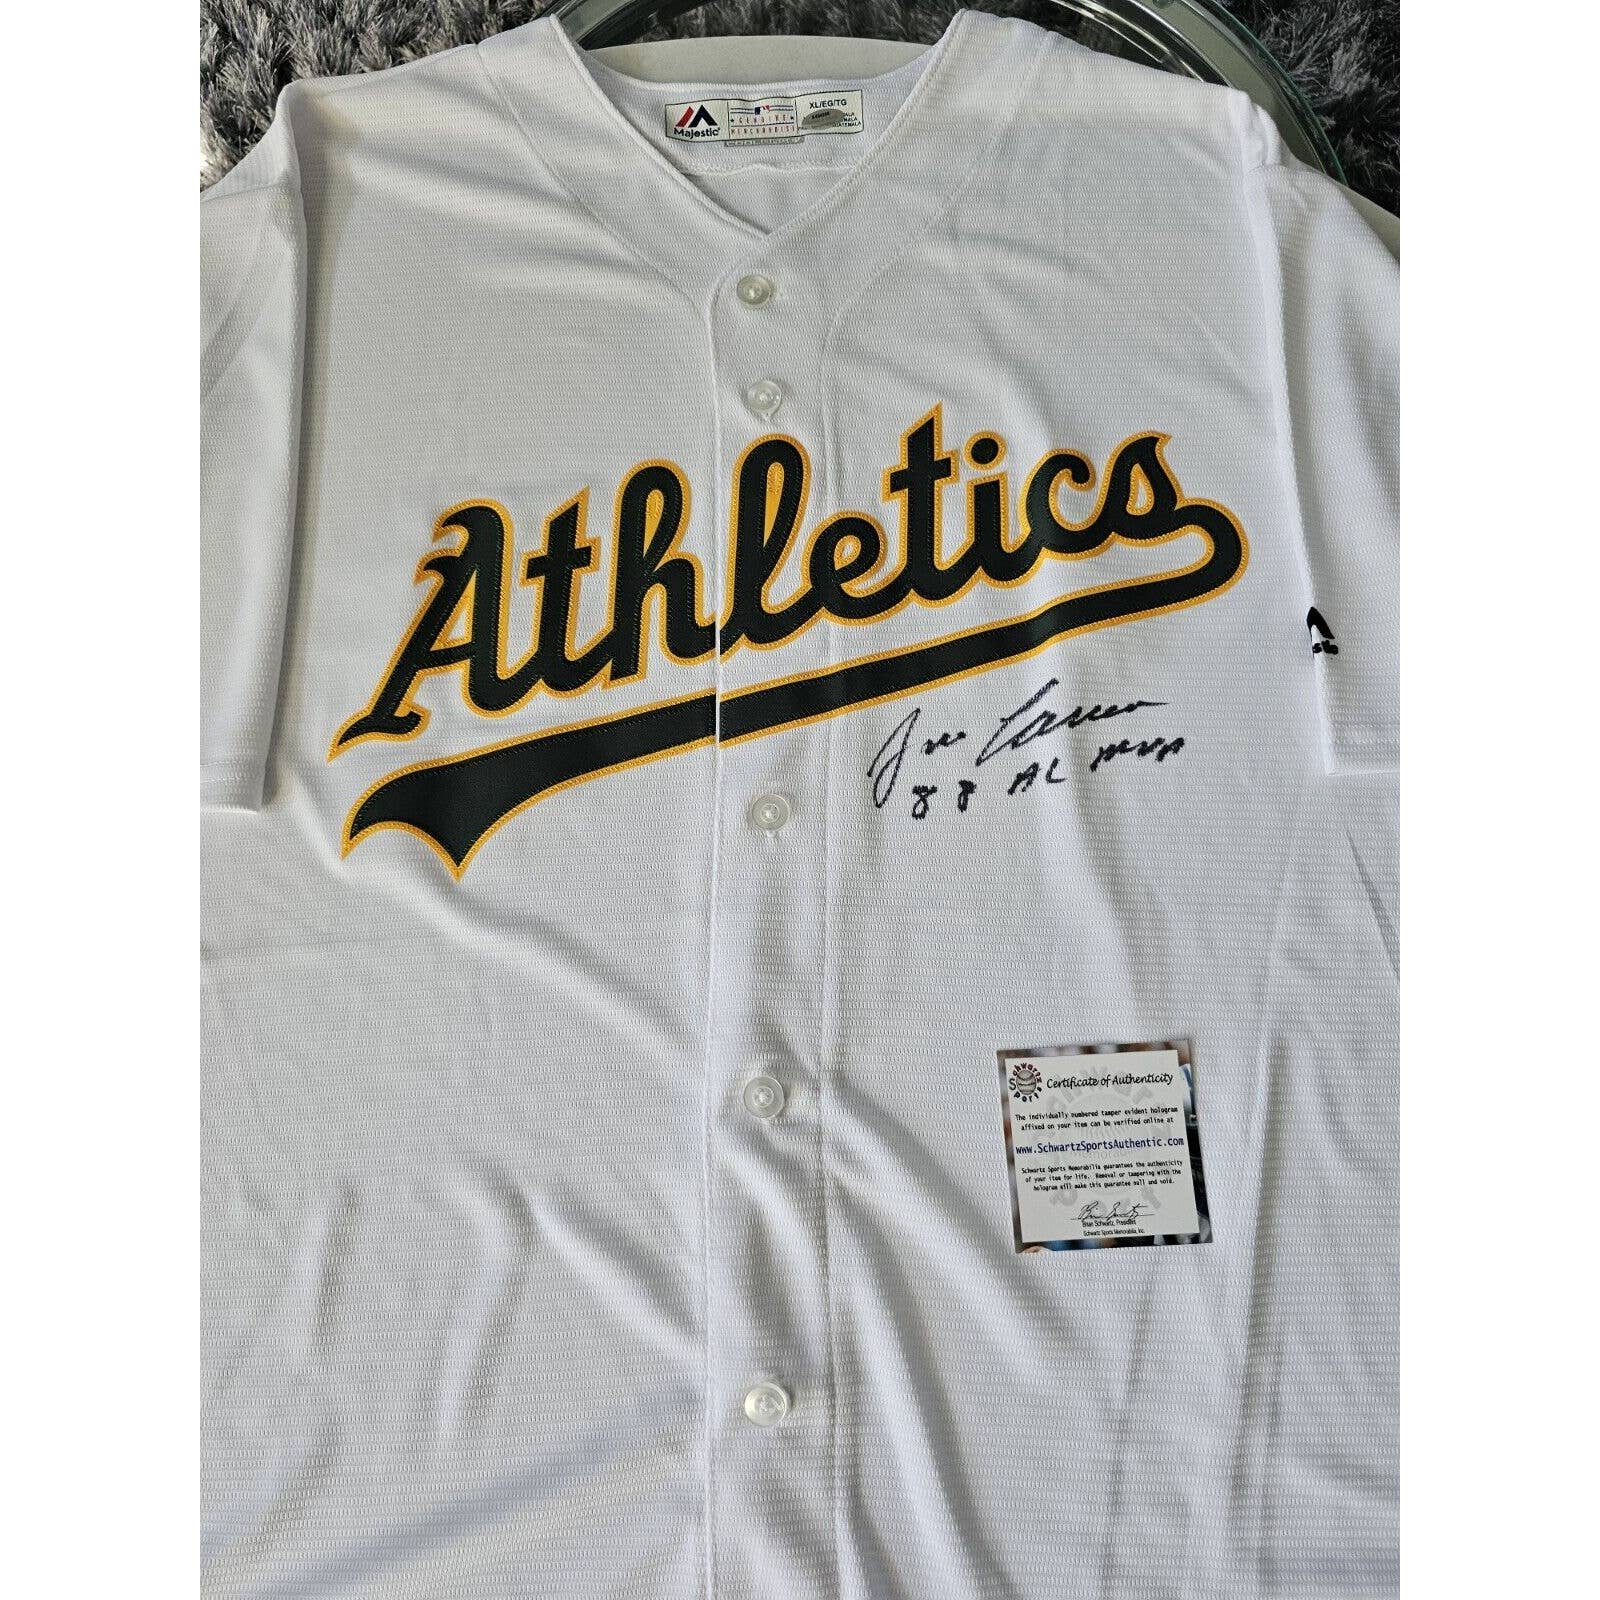 Jose Canseco Autographed/Signed Jersey COA Oakland Athletics A’s Bash Bros - TreasuresEvolved